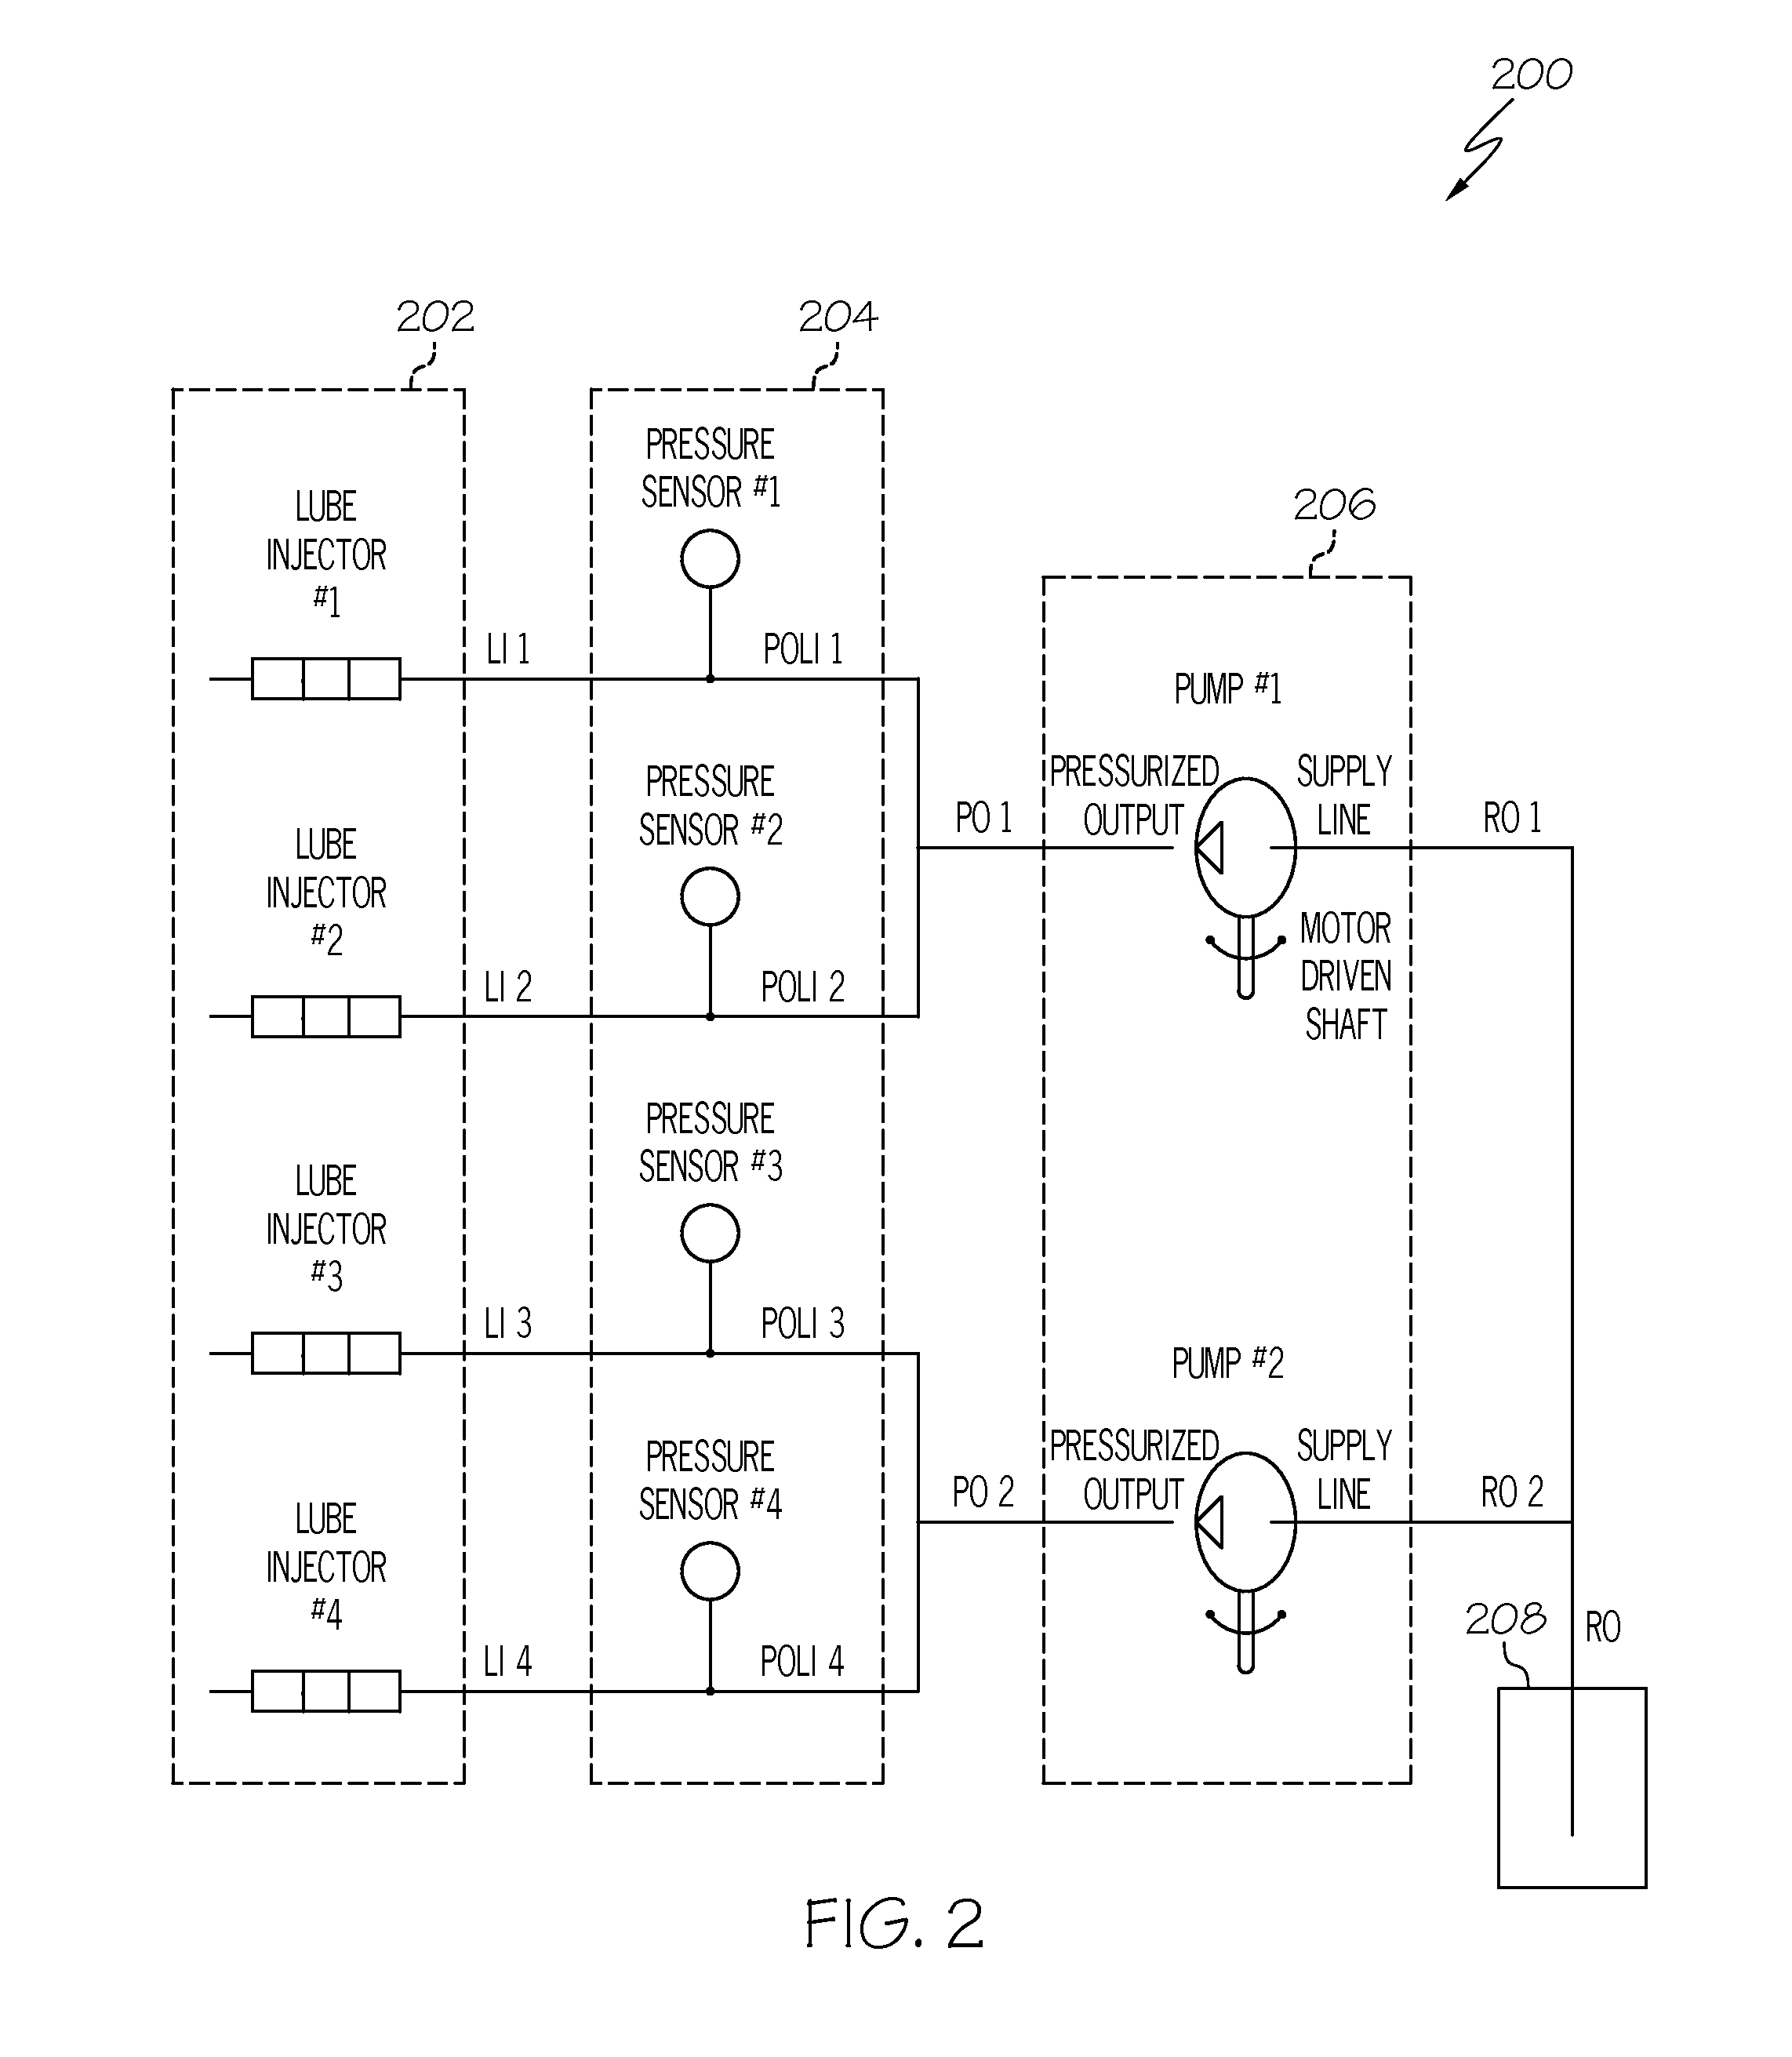 Methods and apparatus to map schematic elements into a database